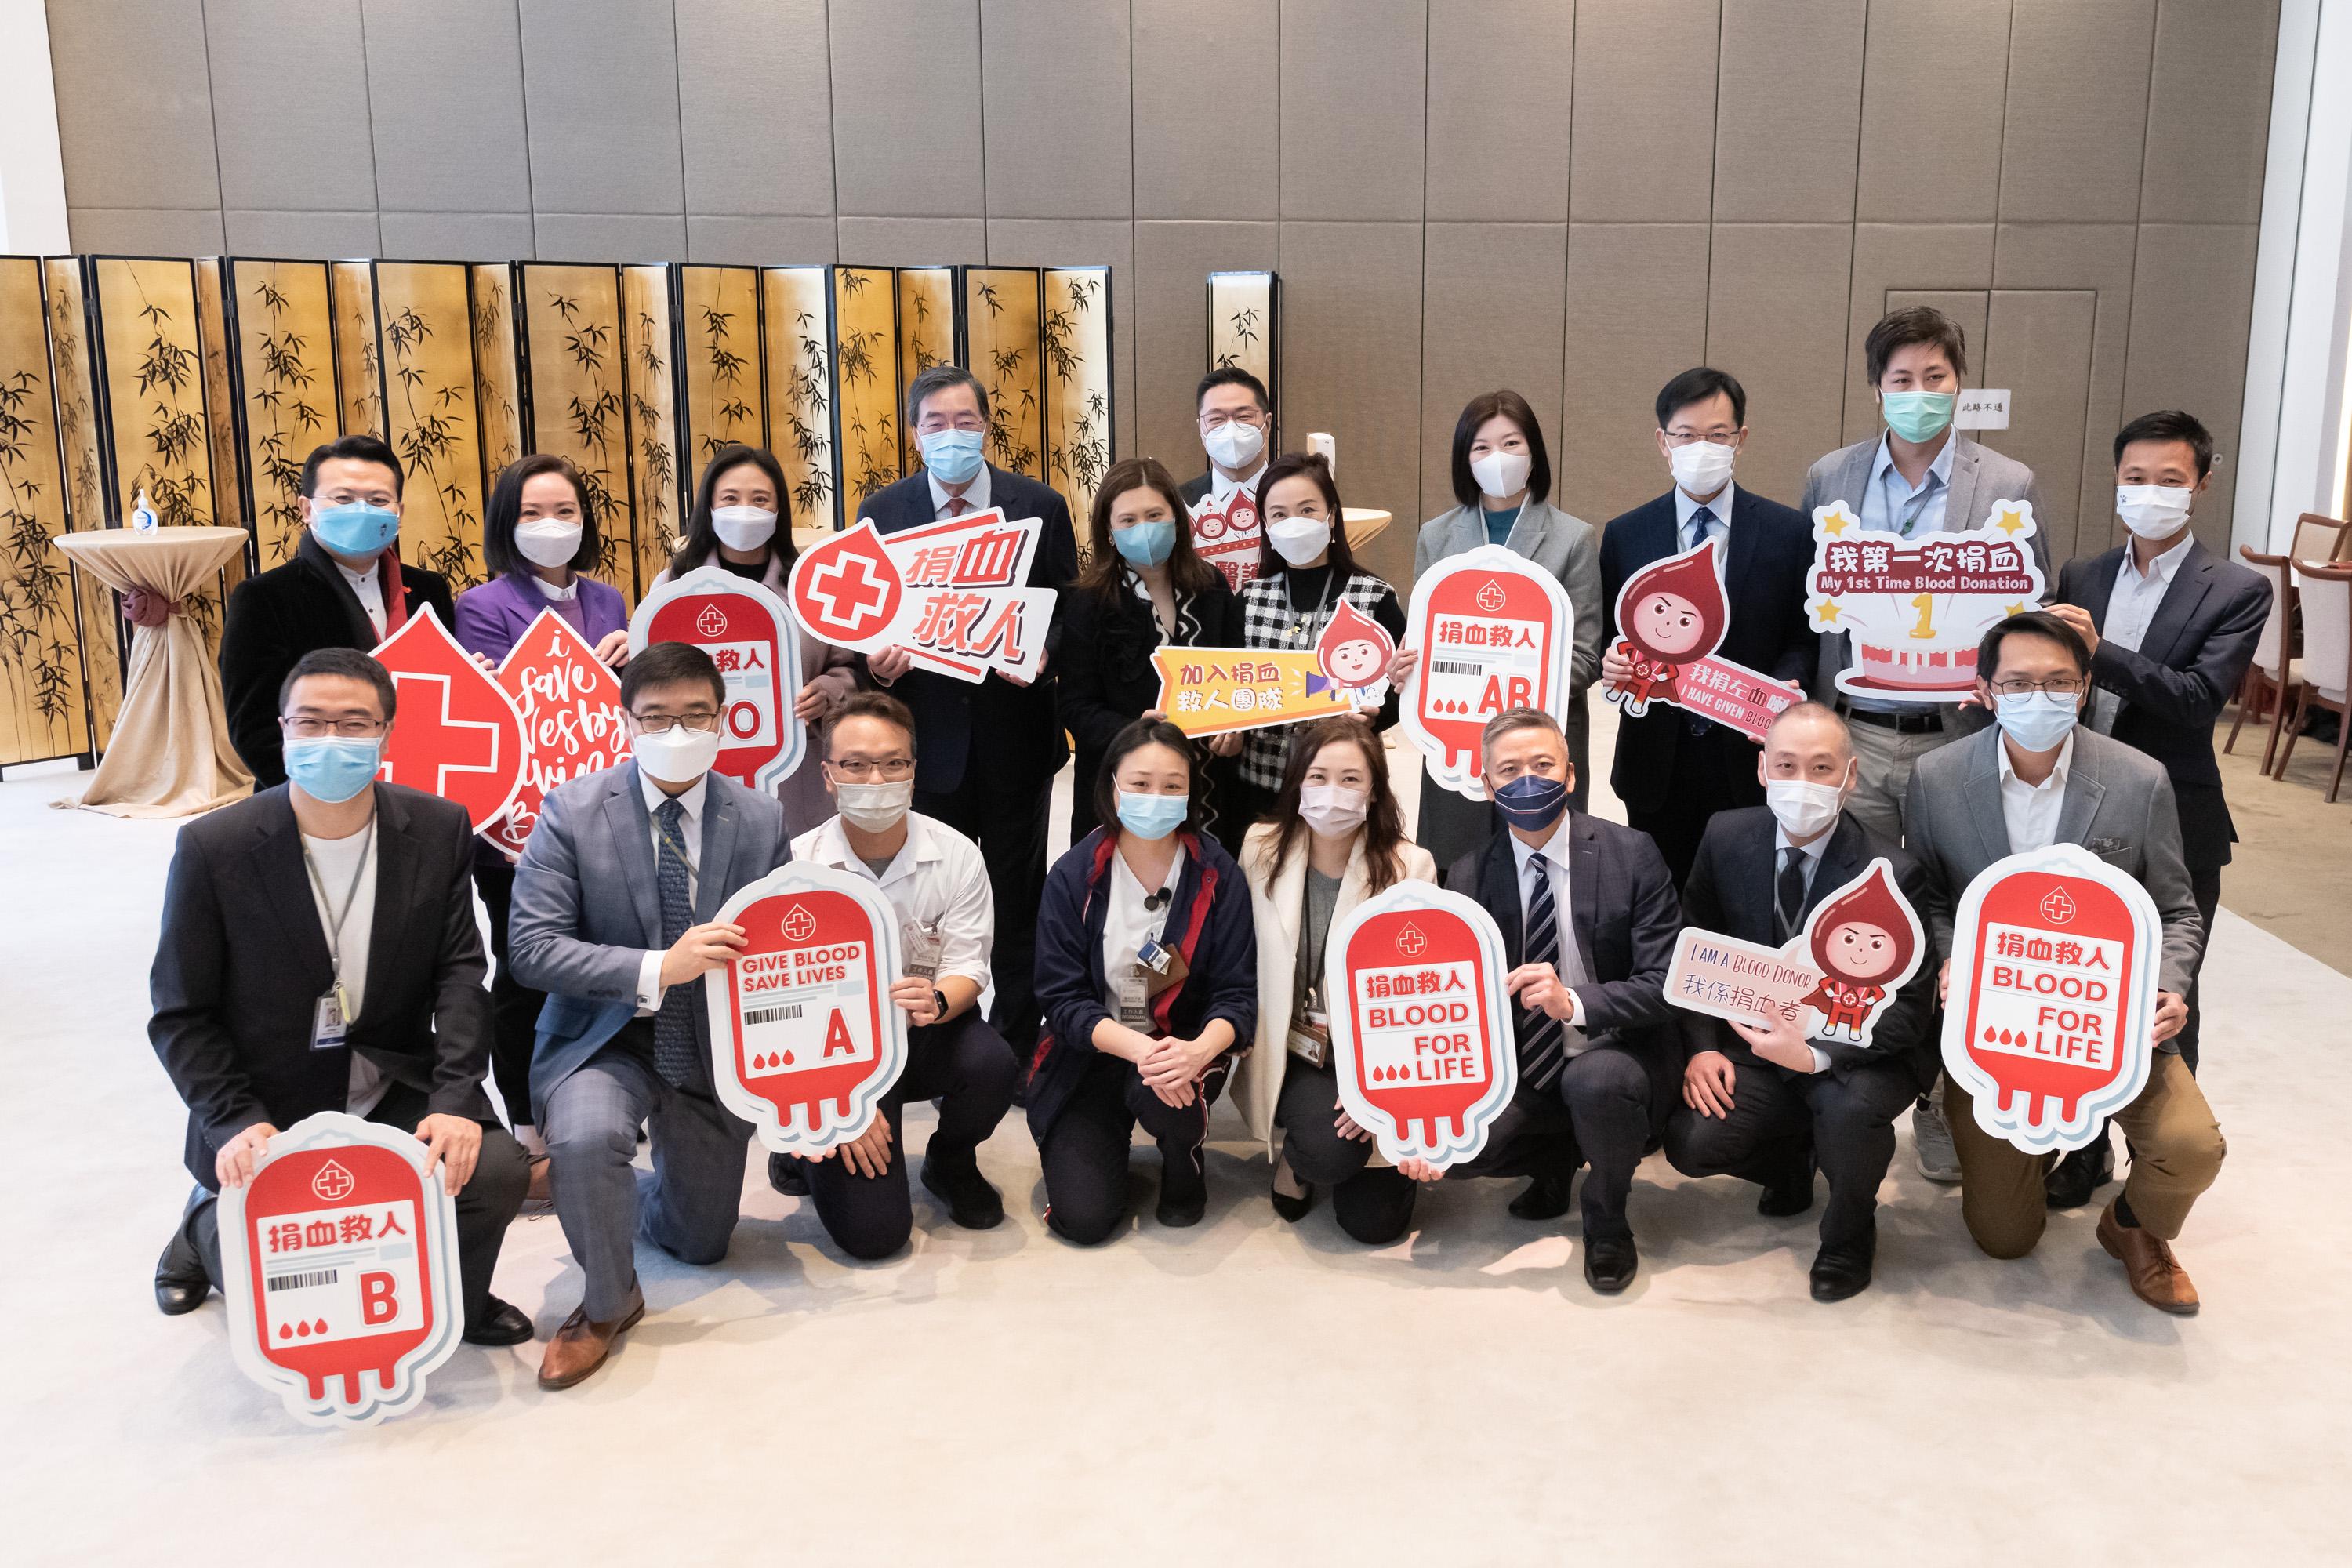 The Legislative Council (LegCo) Blood Donation Day was held today (February 15) in the LegCo Complex. Photo shows LegCo Members in a group photo before the event to promote blood donation.